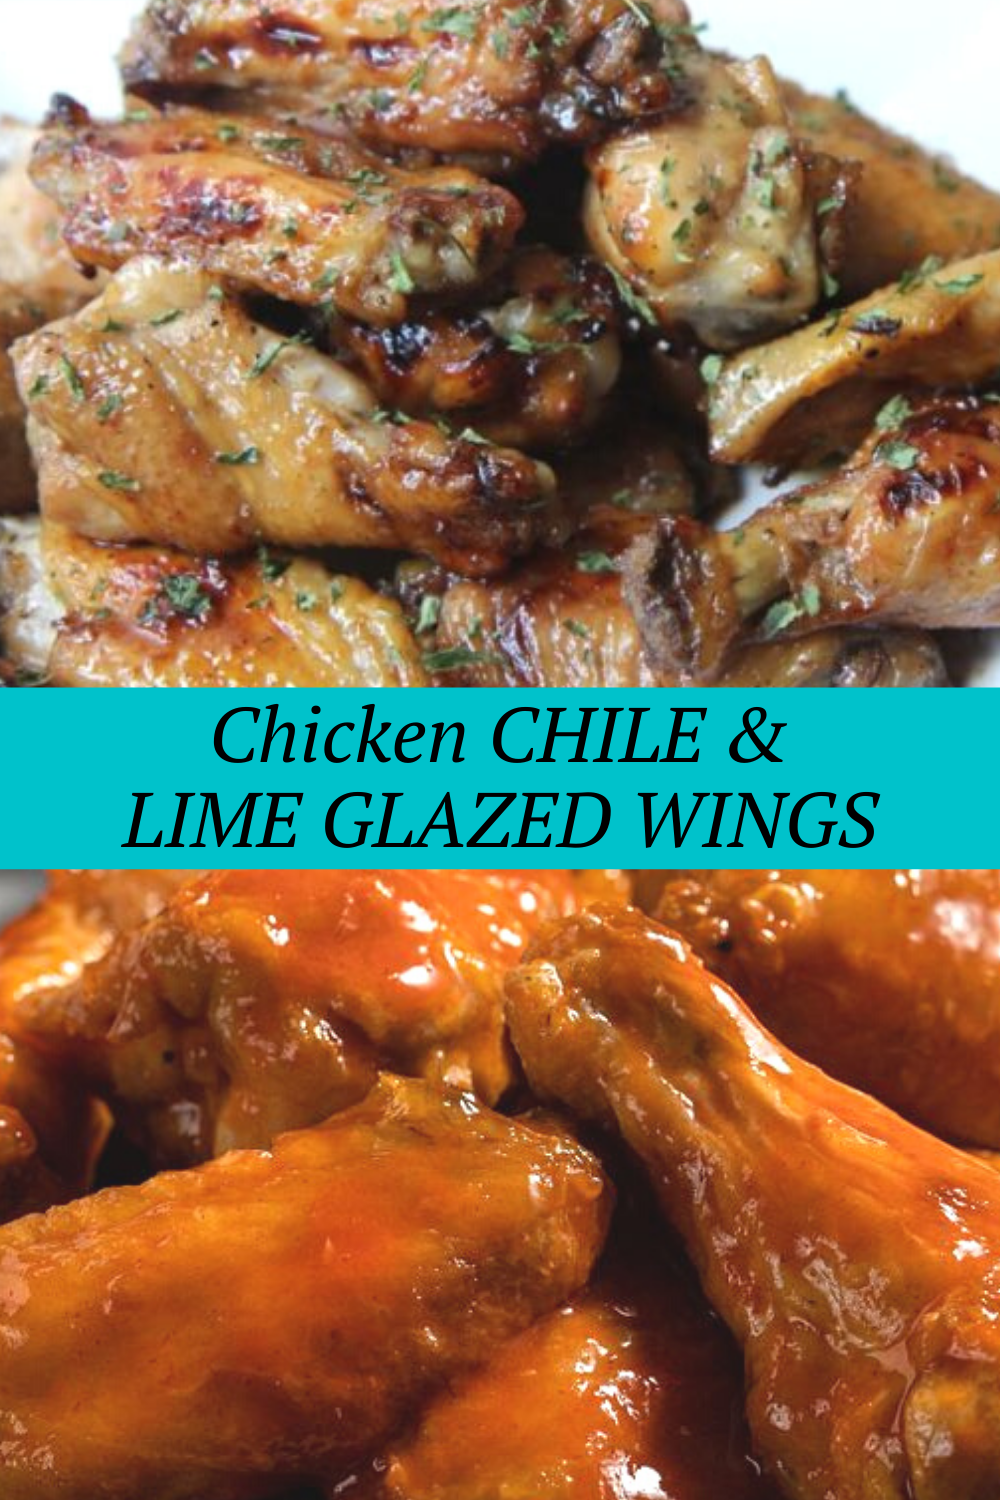 Chicken Chile & Lime Glazed Wings